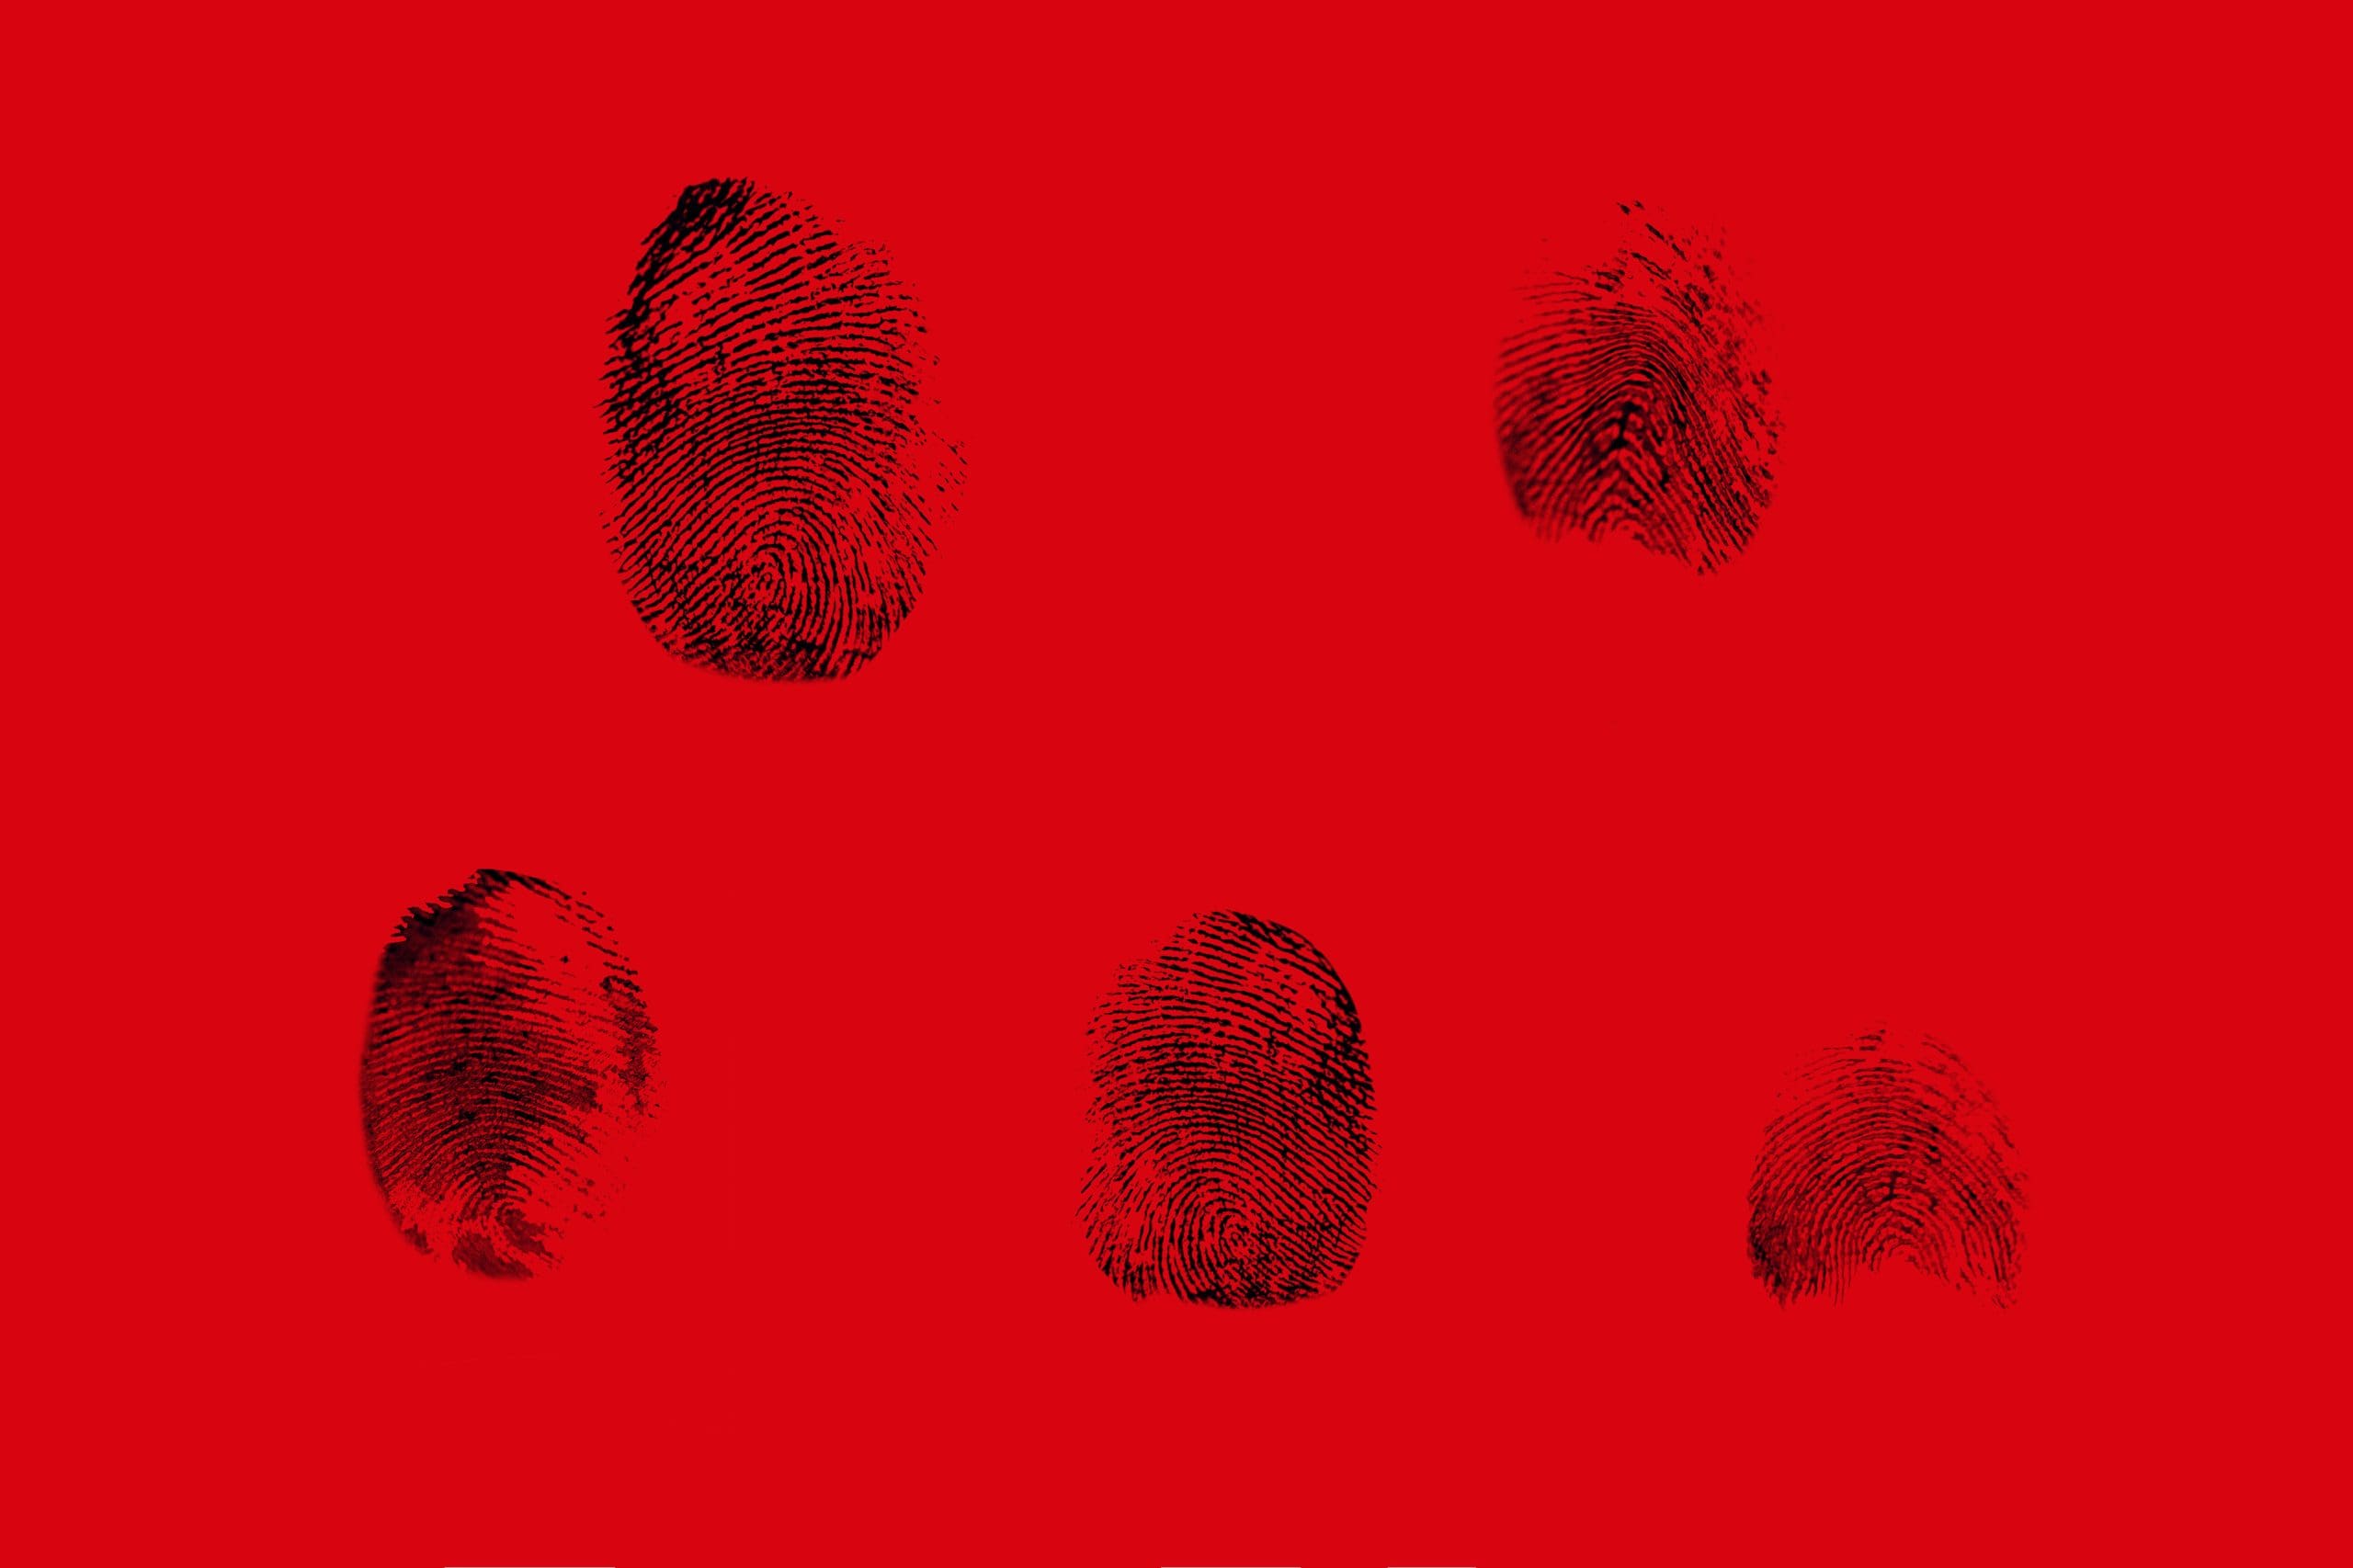 The cover of a book with four finger prints on a red background, symbolizing the need for expungement of DNA records.